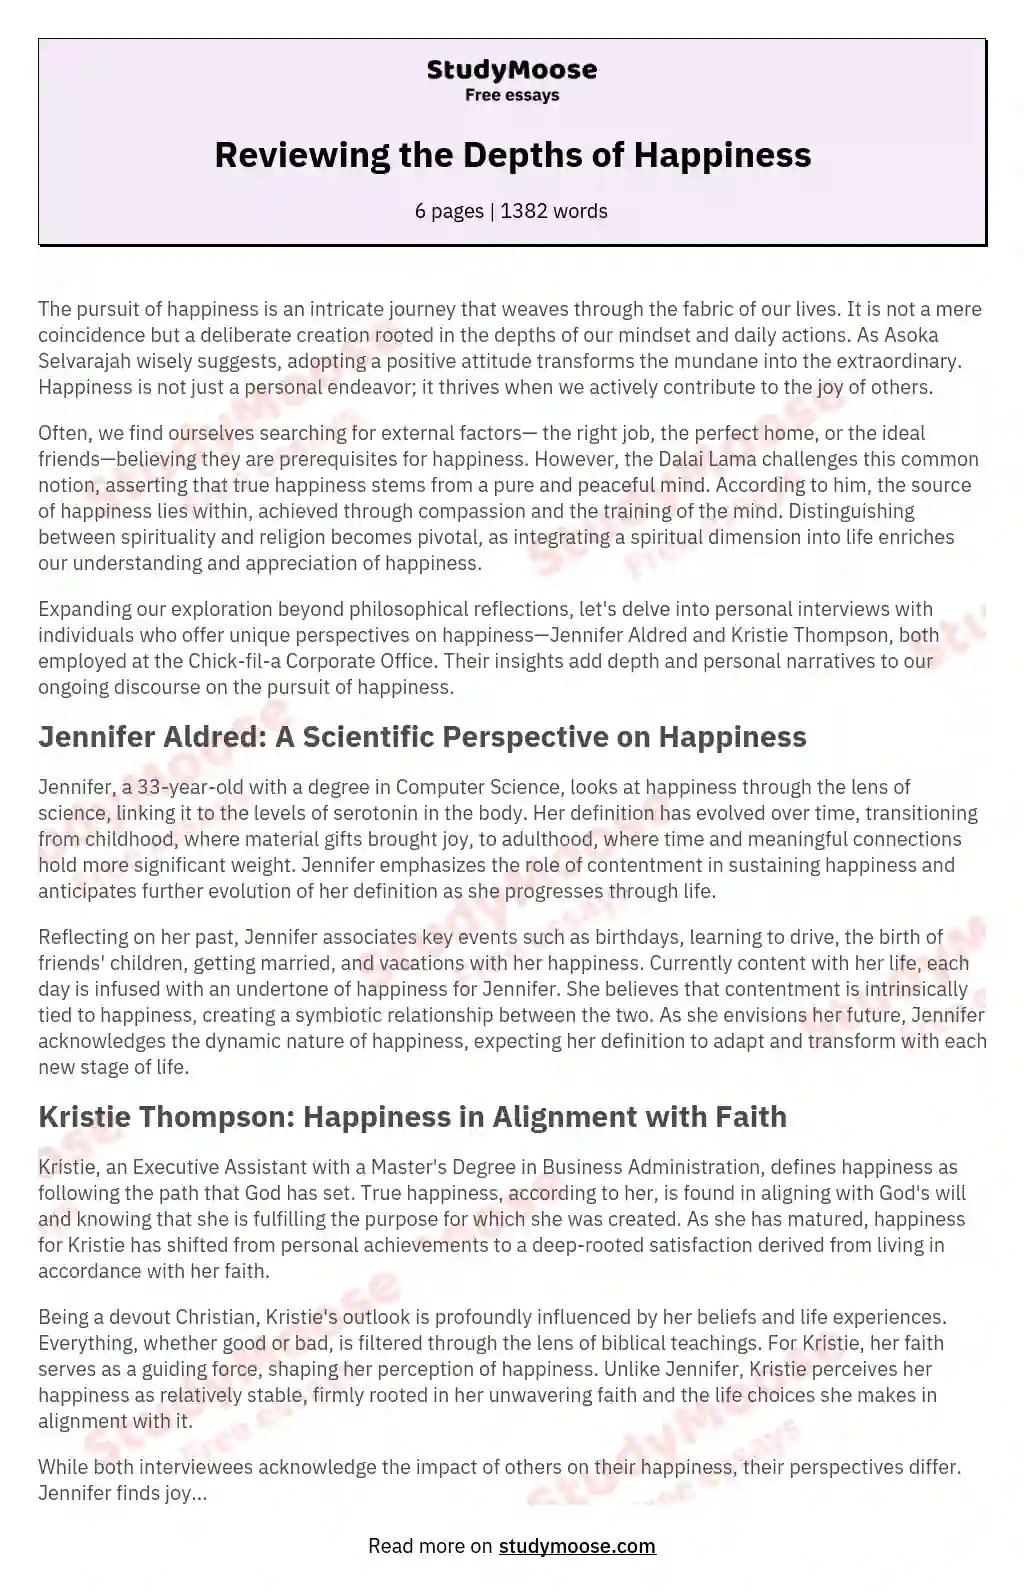 Reviewing the Depths of Happiness essay